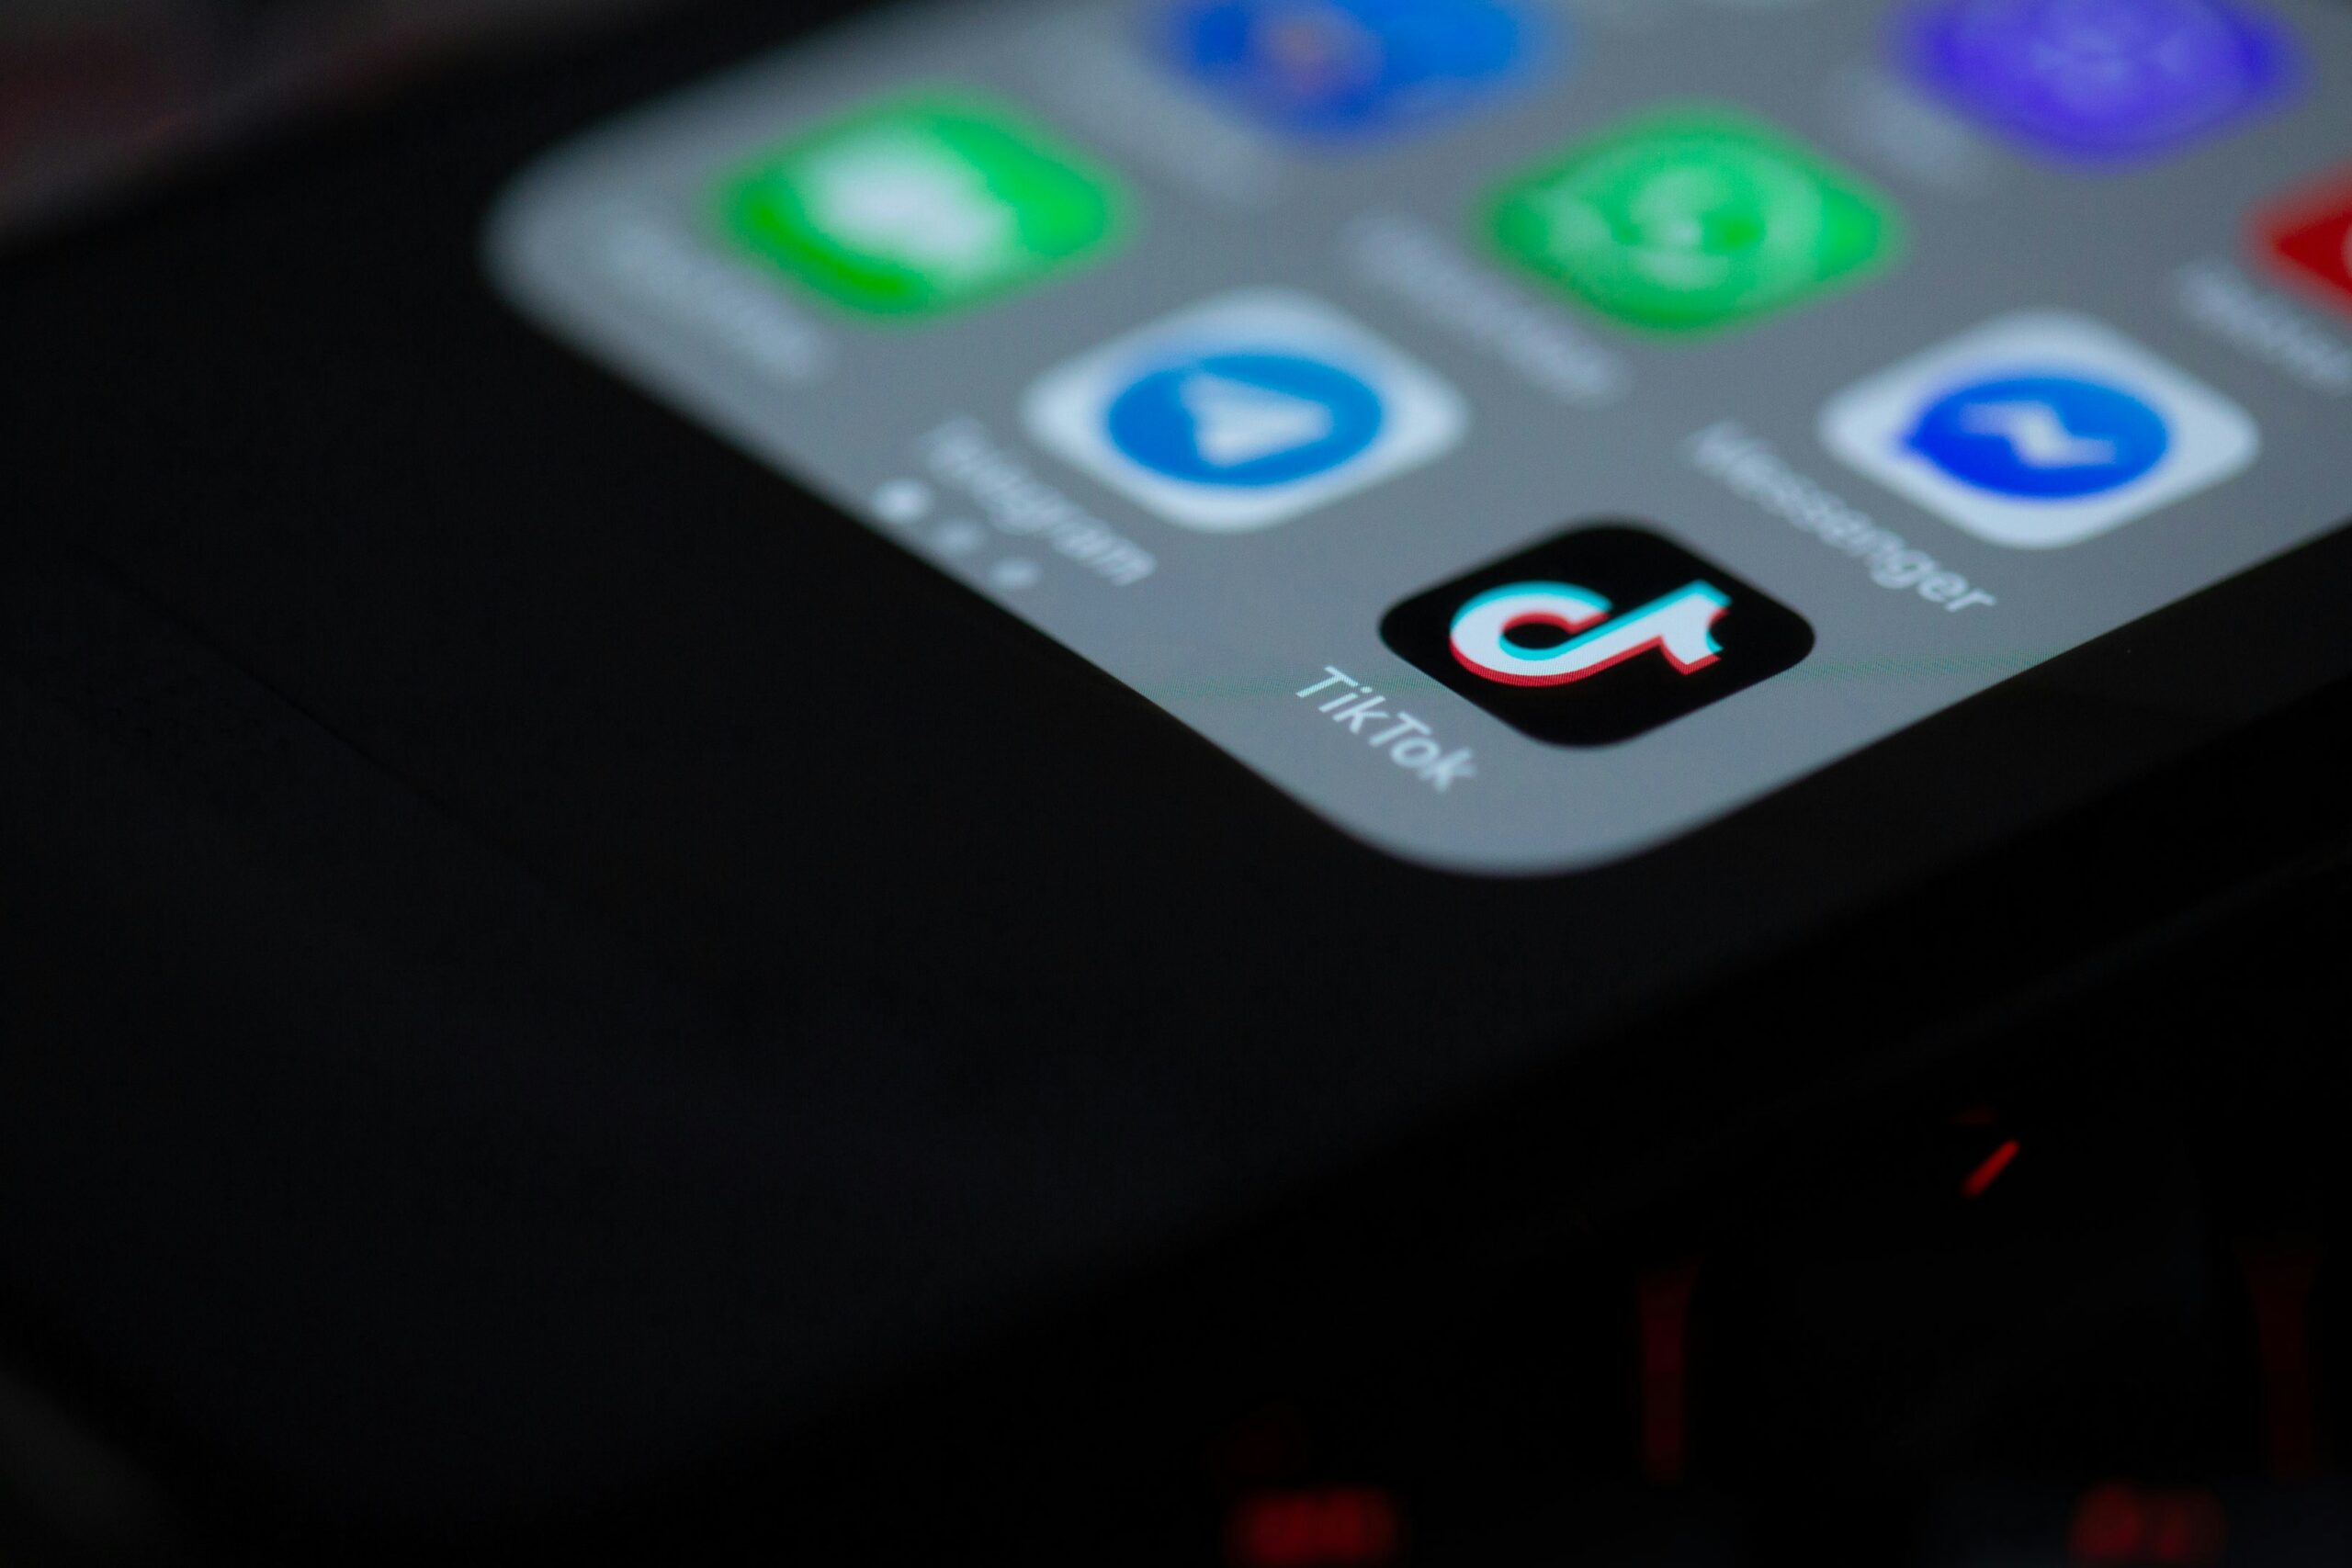 photo of a cell phone showing the TikTok app logo. Photo by Solen Feyissa on Unsplash